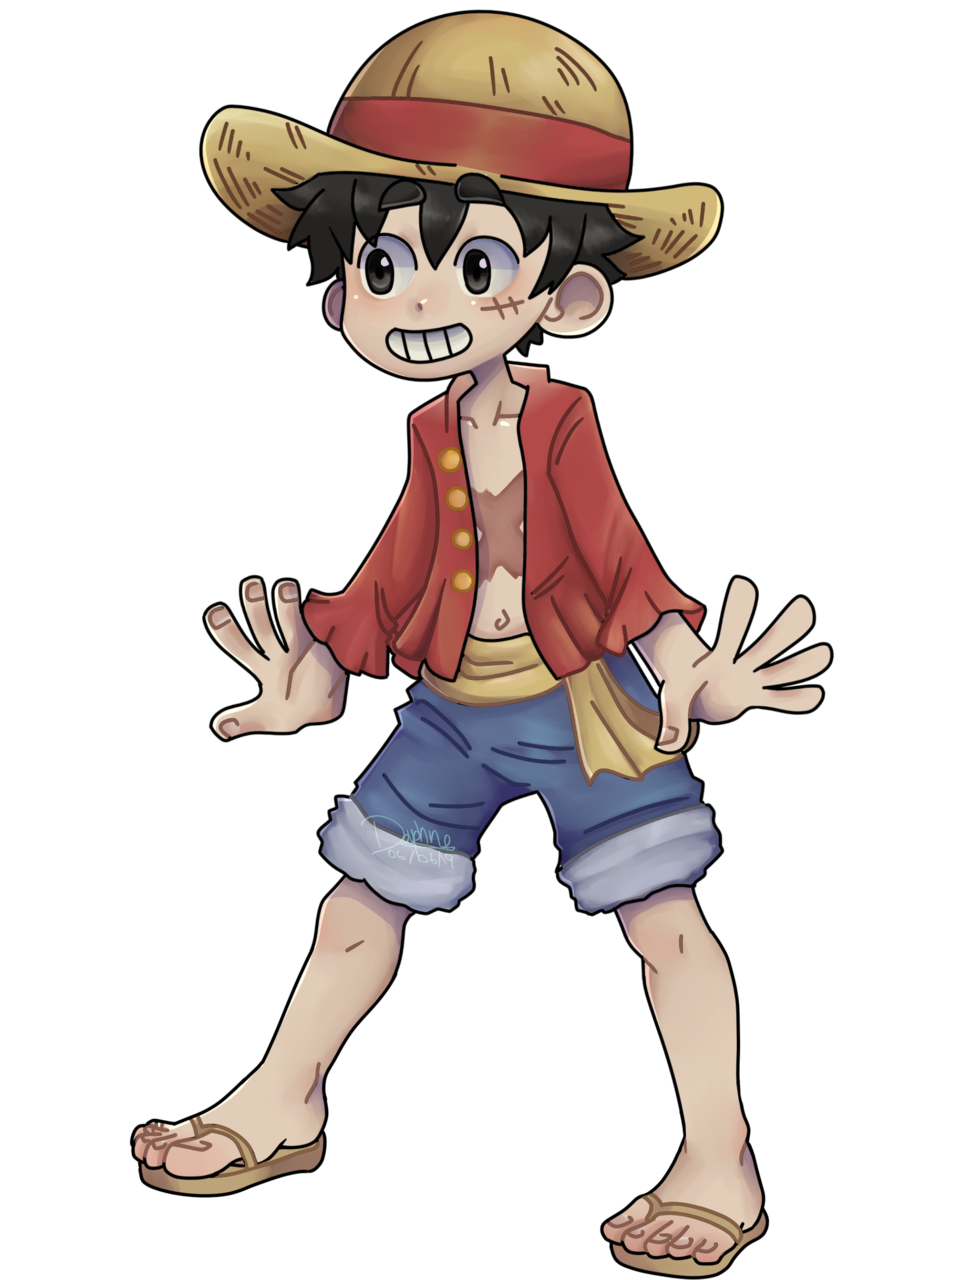 Luffy-PNG-Transparent-Picture.png - 4k Wallpapers